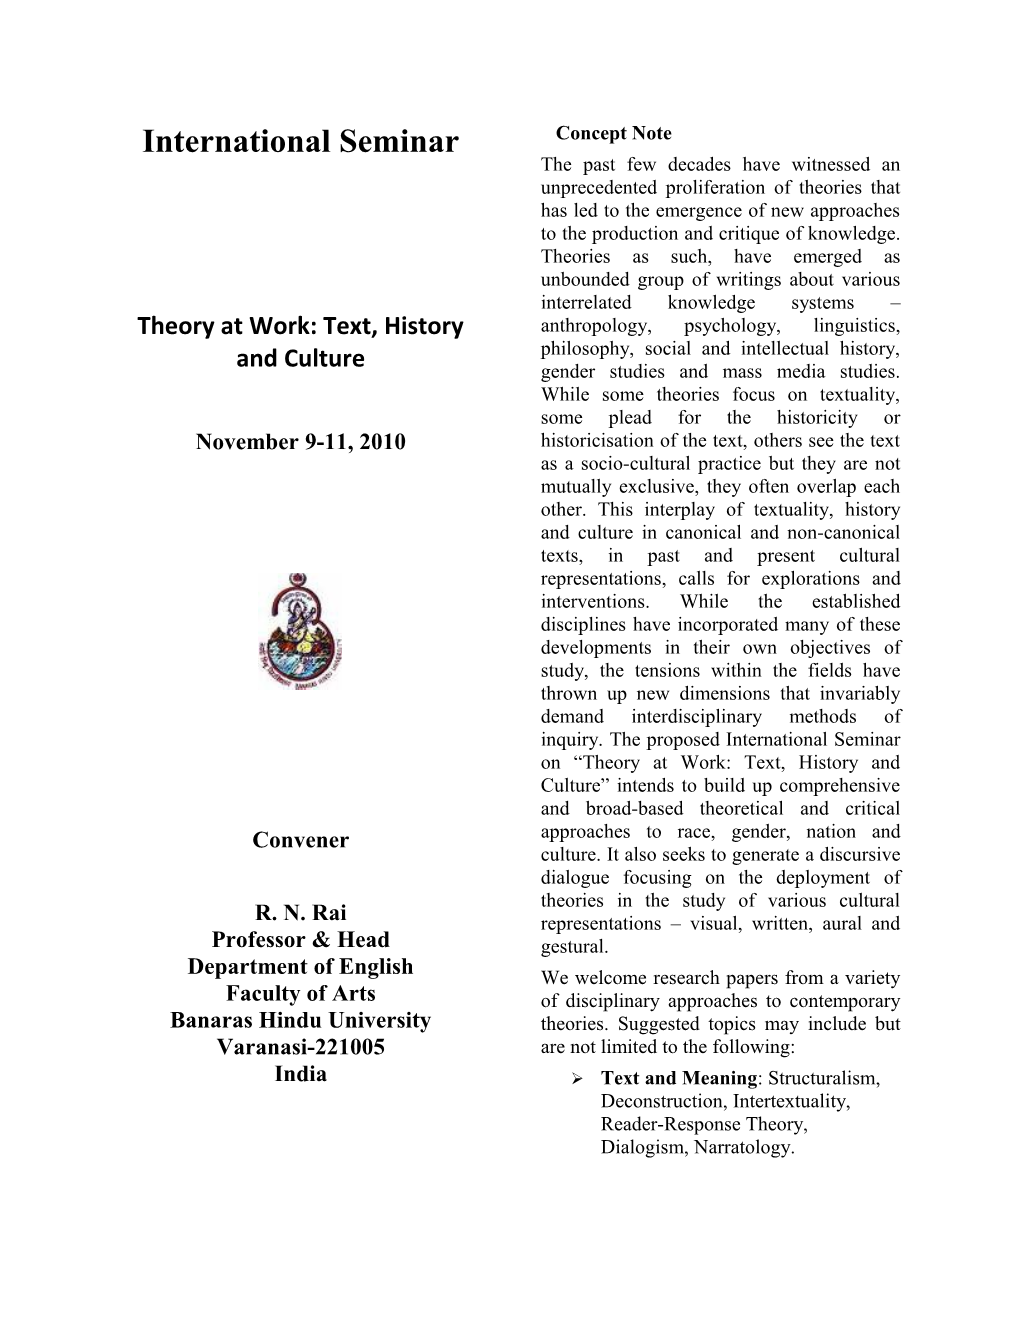 Theory at Work: Text, History and Culture